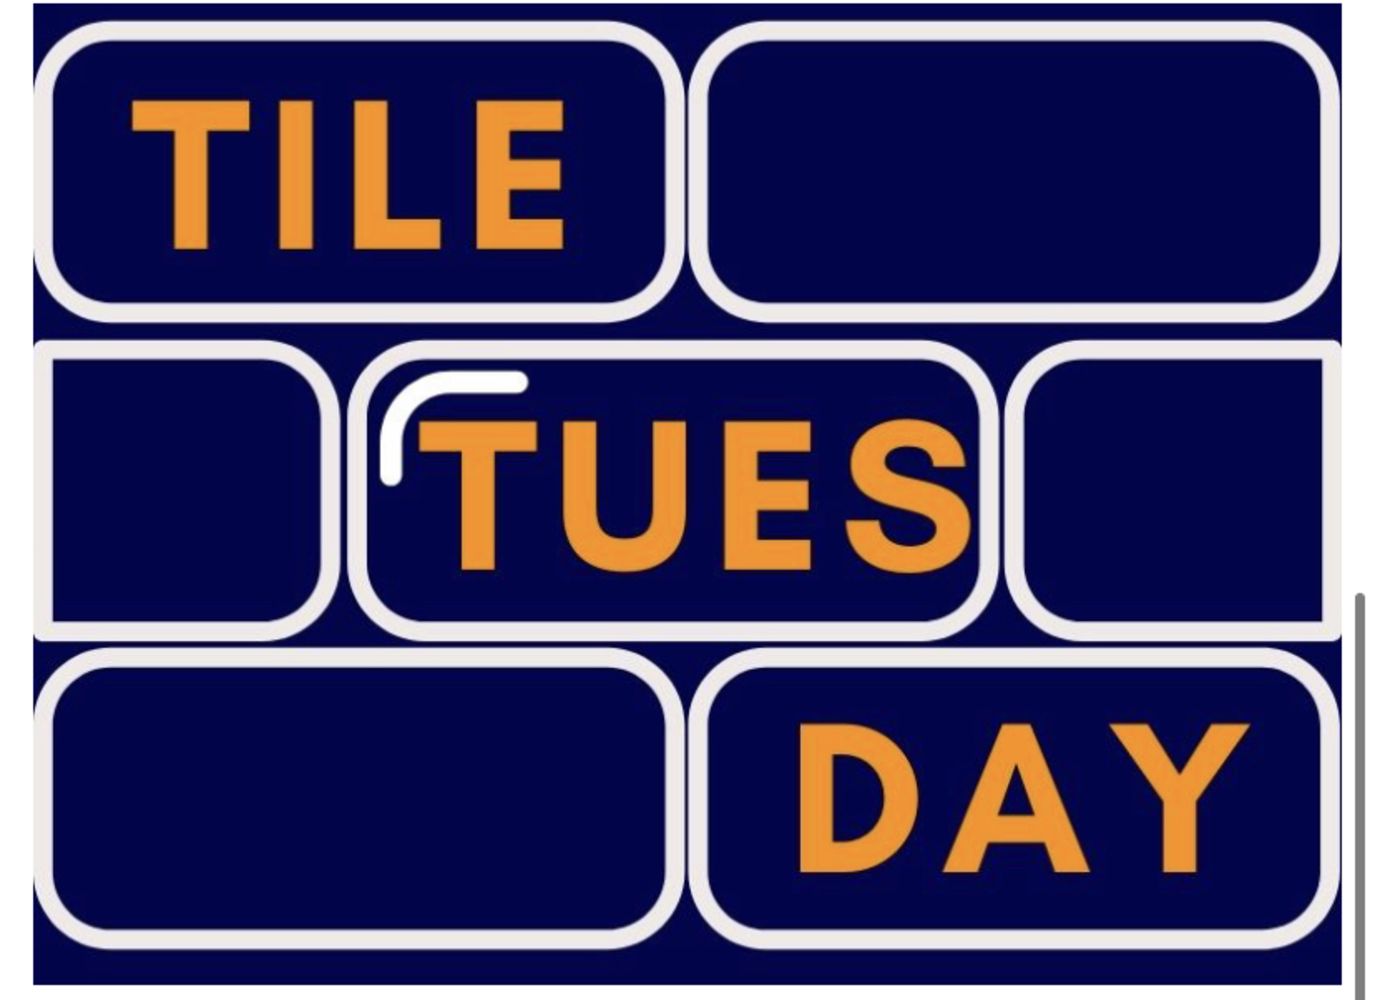 No Reserve - Tile Tuesday - “over £80k worth of tiles – Sourced from Johnsons Tiles” - 9th March